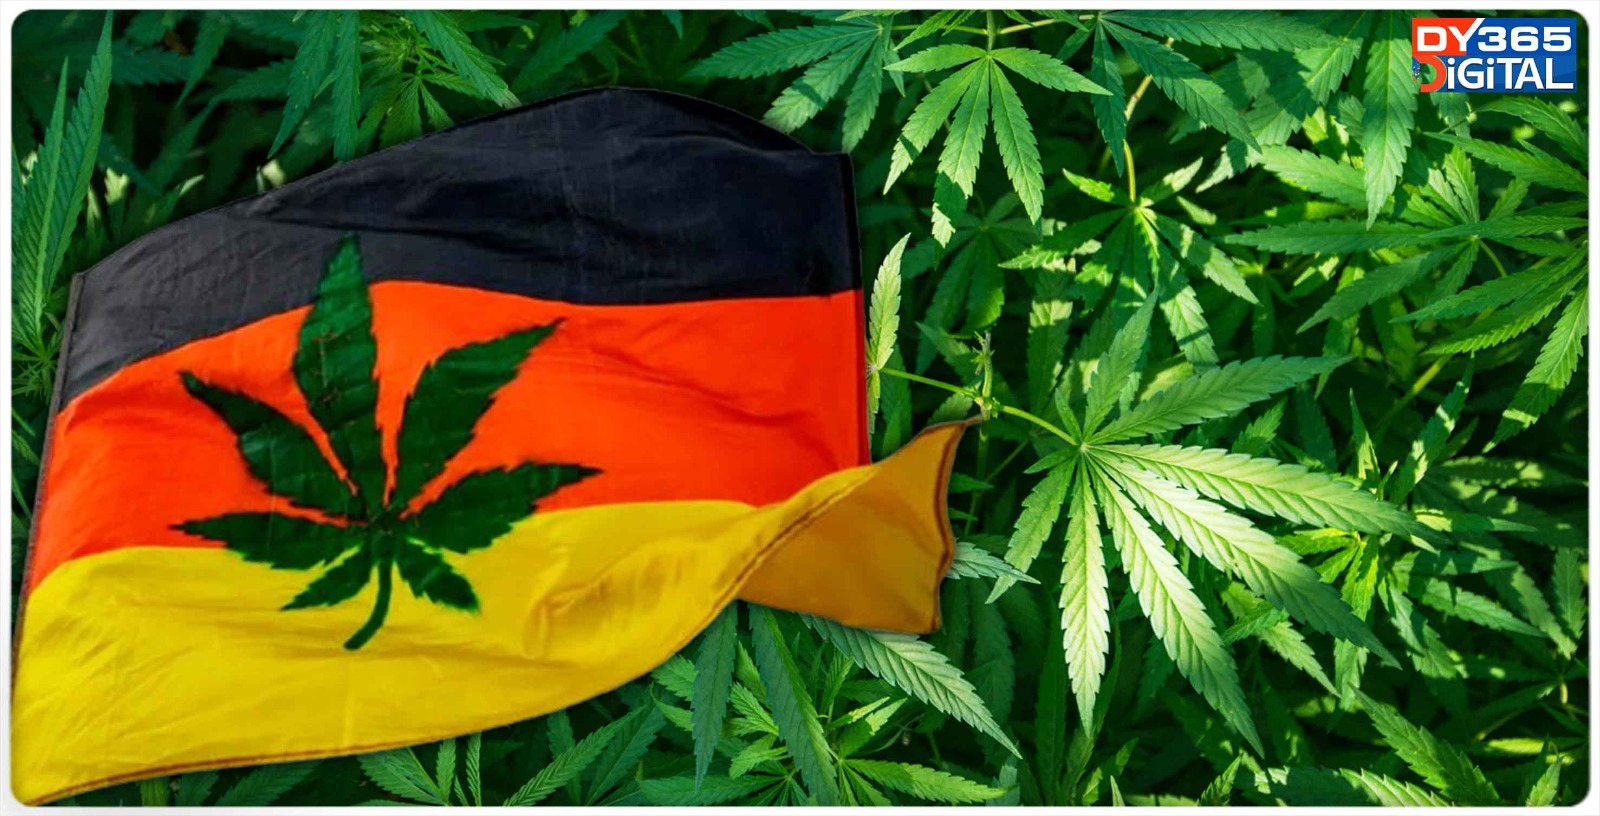 germany-legalizes-possession-of-small-amounts-of-cannabis